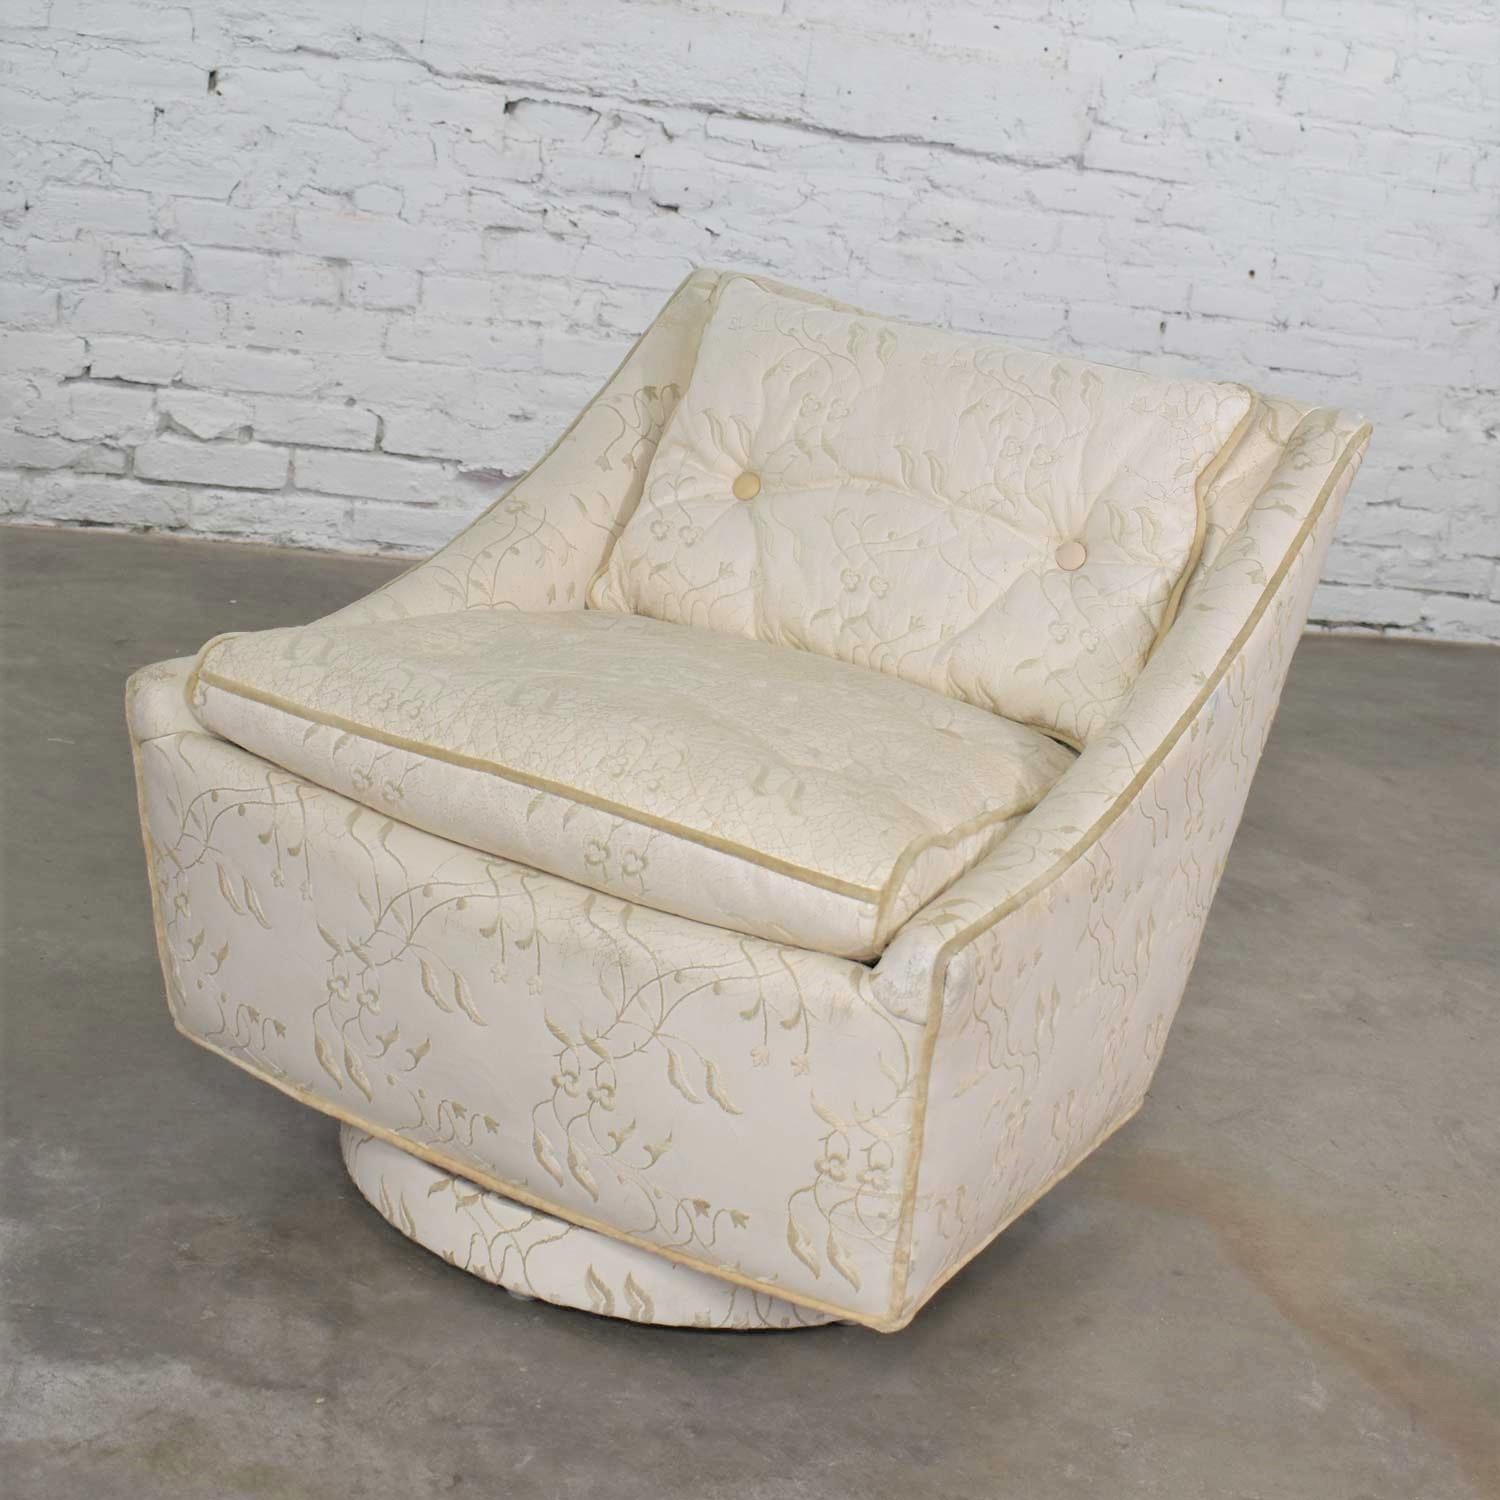 American Vintage Art Deco Petite White Swivel Chair Embroidered Leather by Oxford Ltd. For Sale